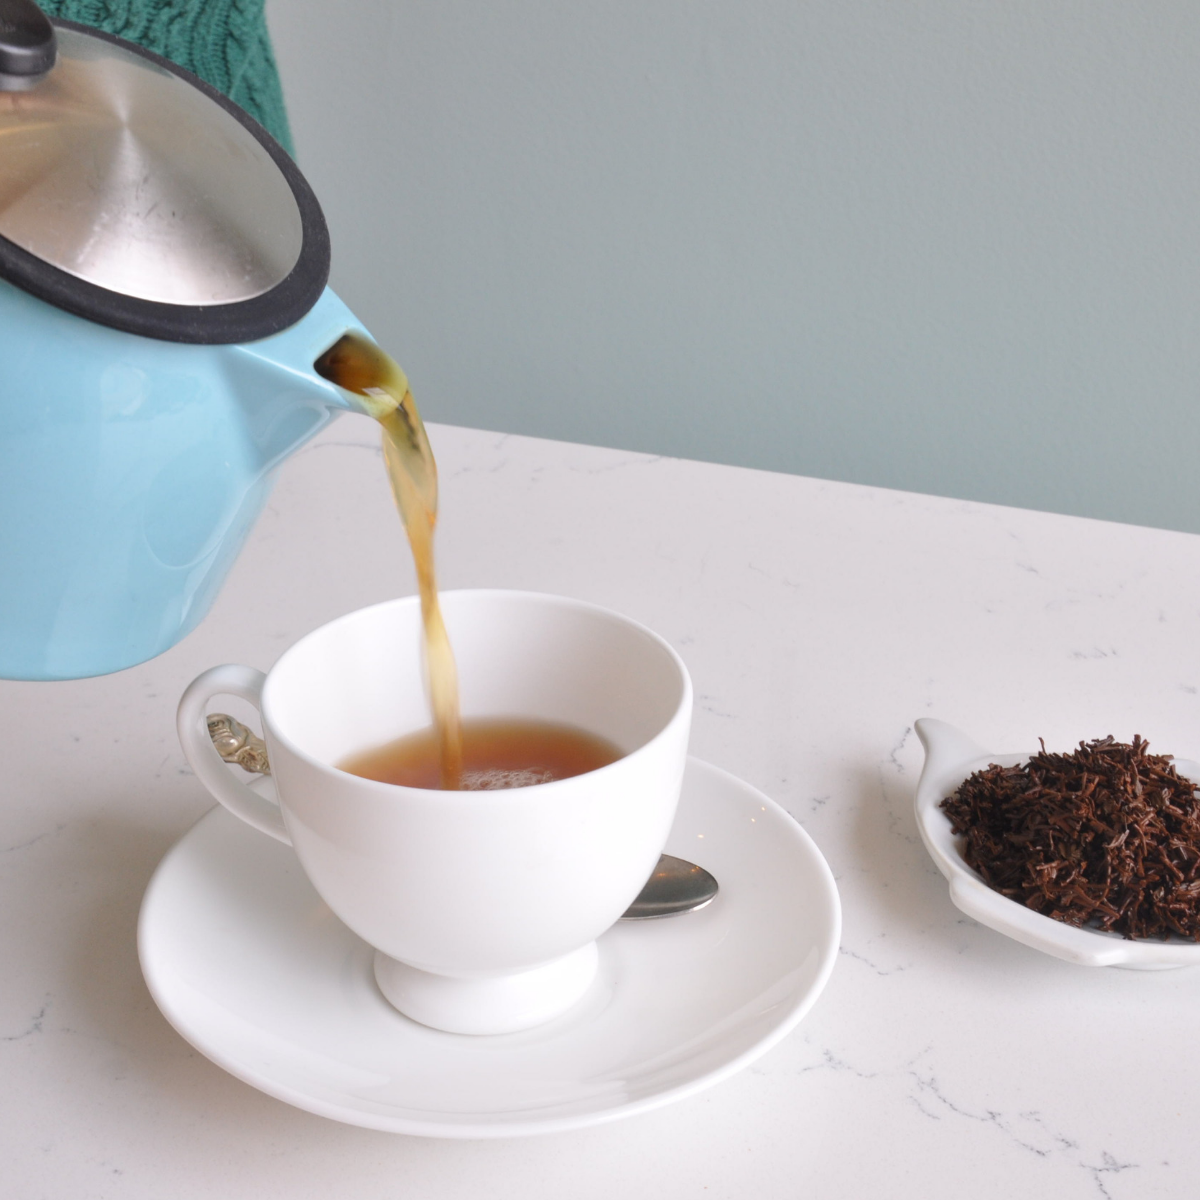 How to enjoy a perfect cup of loose leaf tea